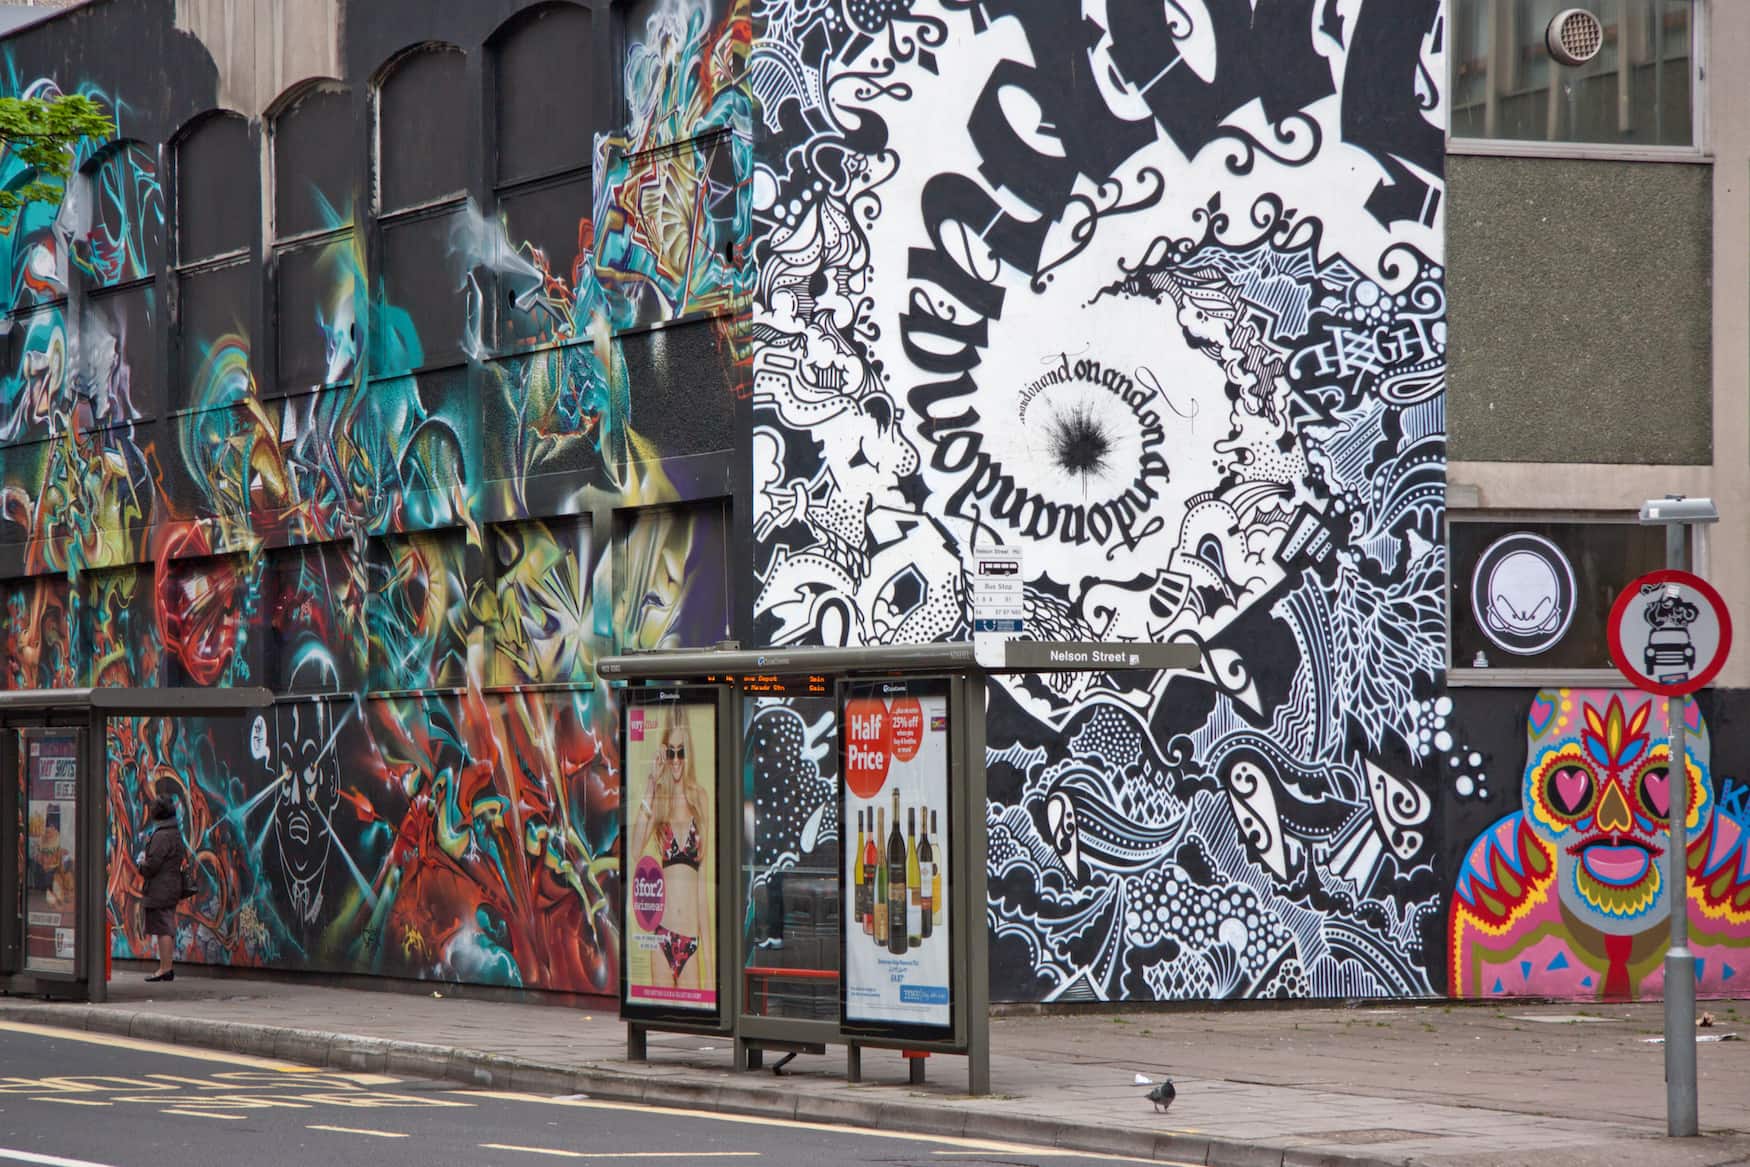 Bristol is one of the best street art cities in the world